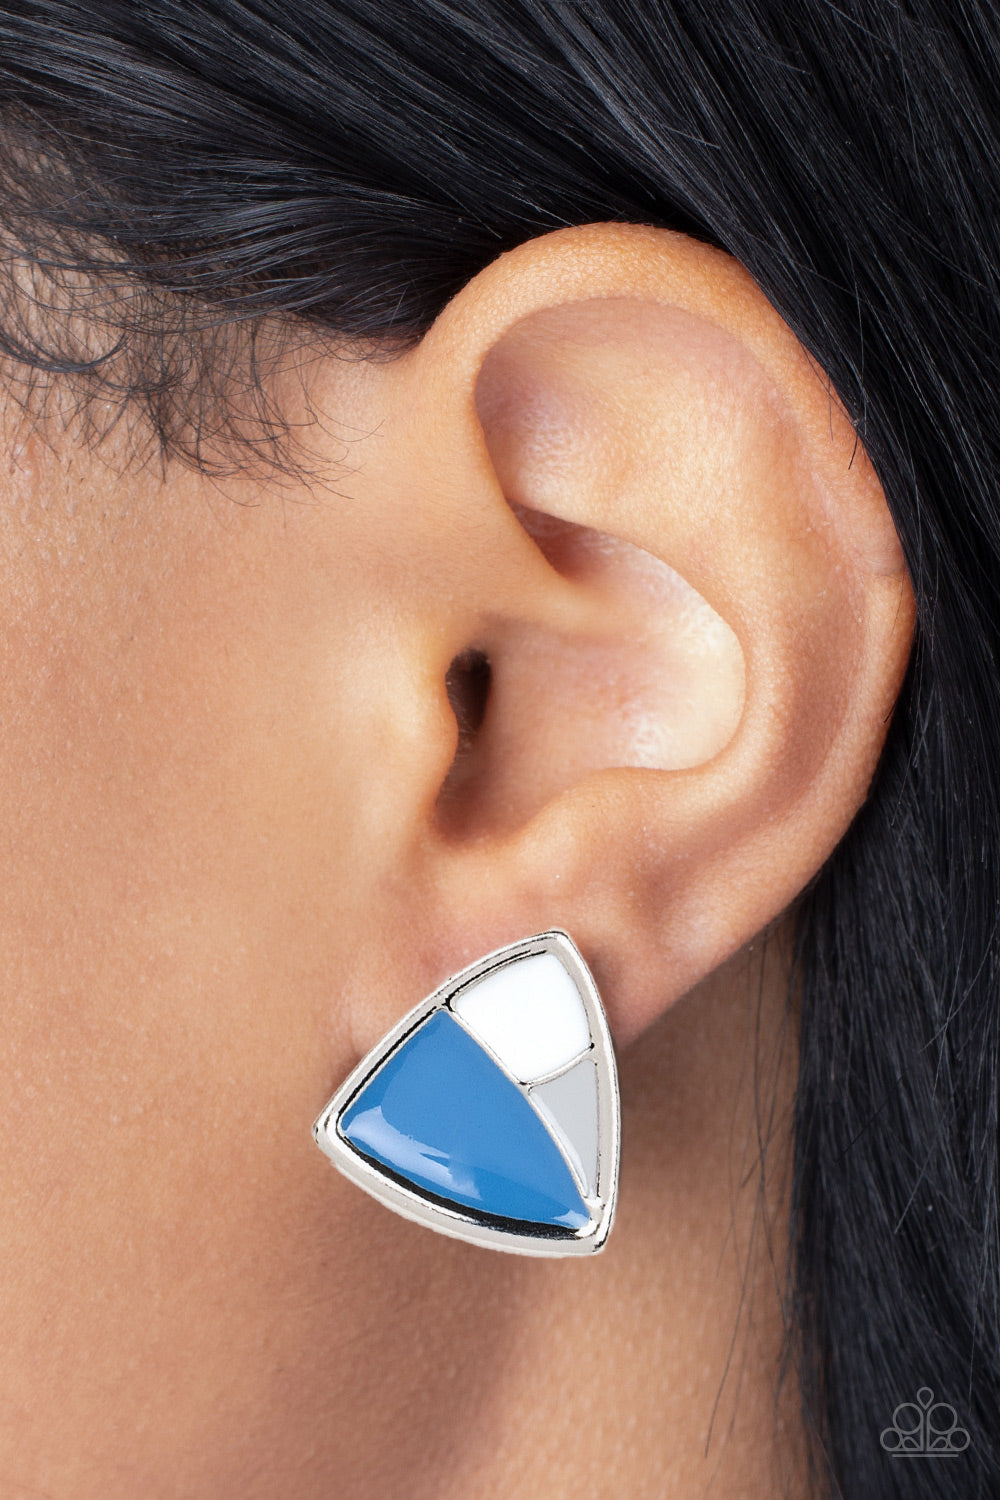 Kaleidoscopic Collision - Blue and Silver Earrings - Paparazzi Accessories - A collision of Skydiver, Northern Droplet, and white painted accents beam inside an asymmetric triangular frame for a contemporary pop of color.